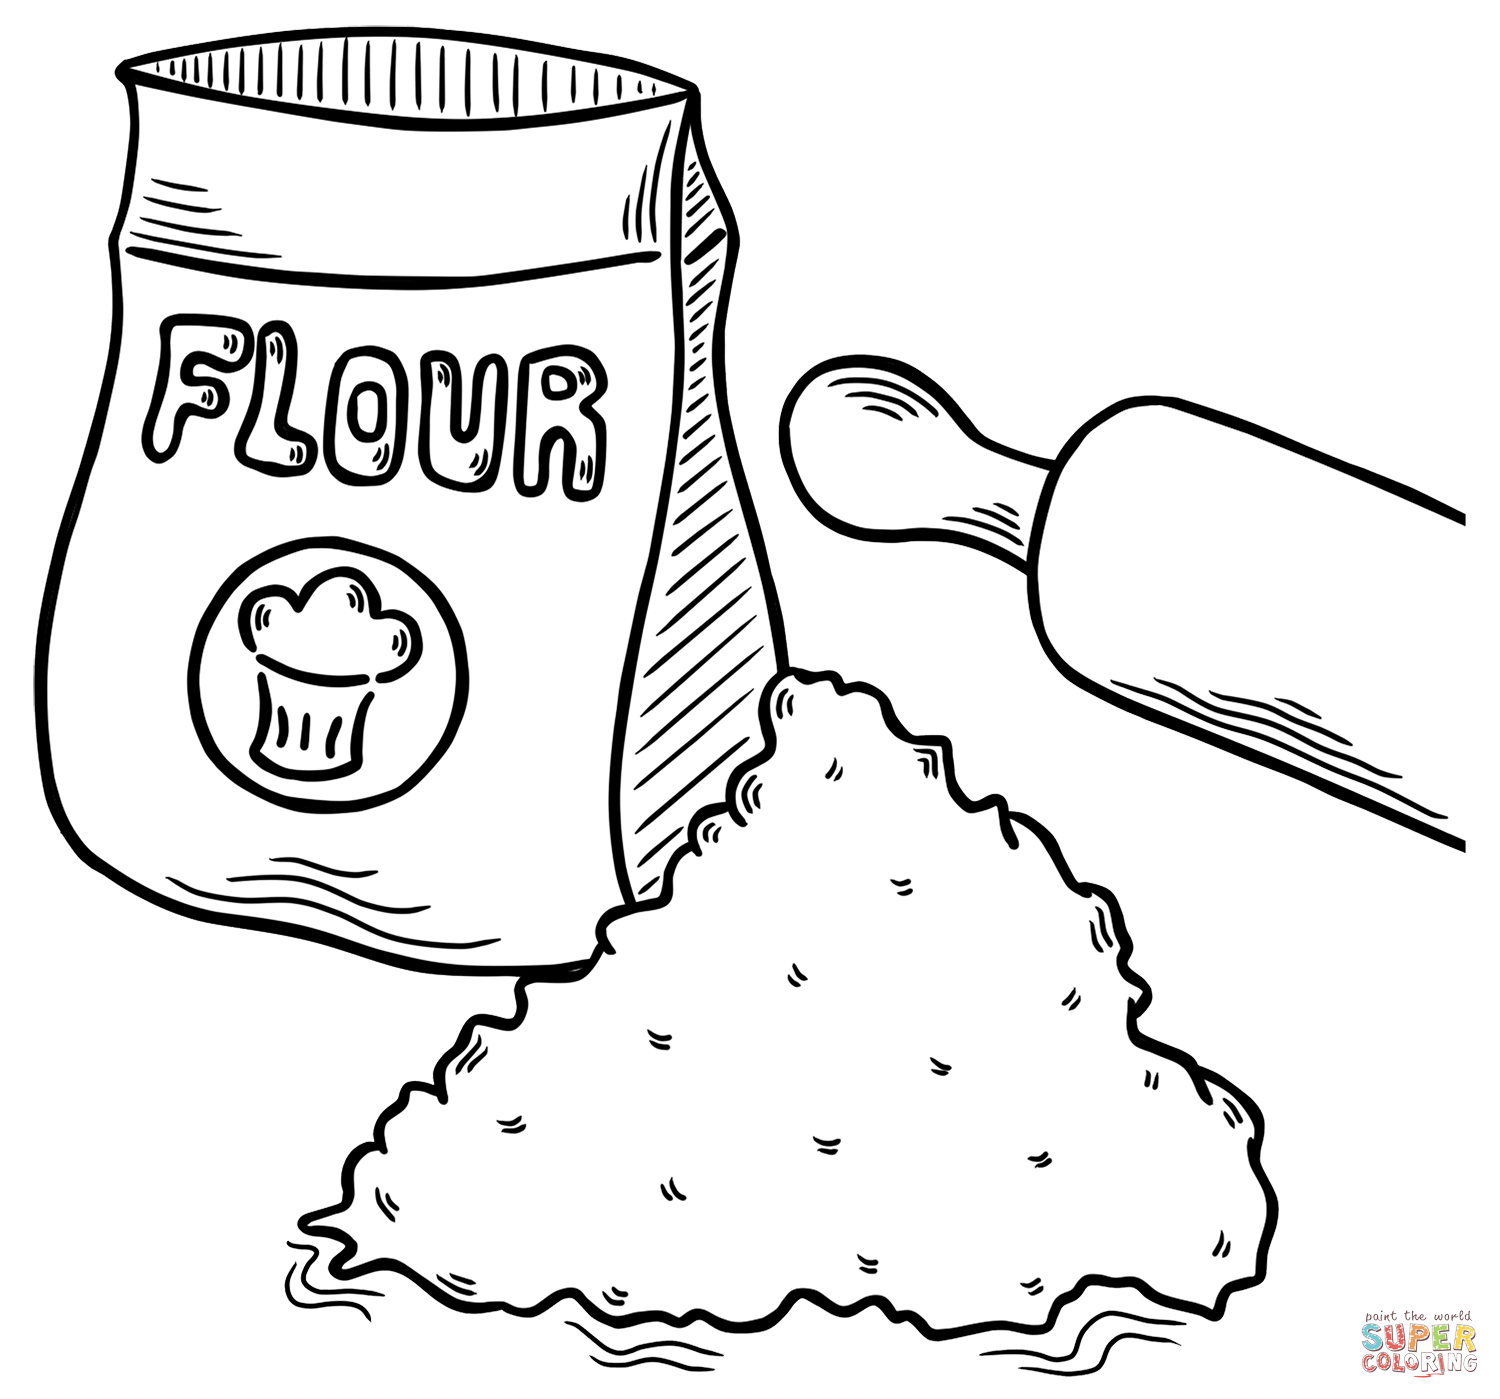 Wheat Flour coloring page | Free Printable Coloring Pages